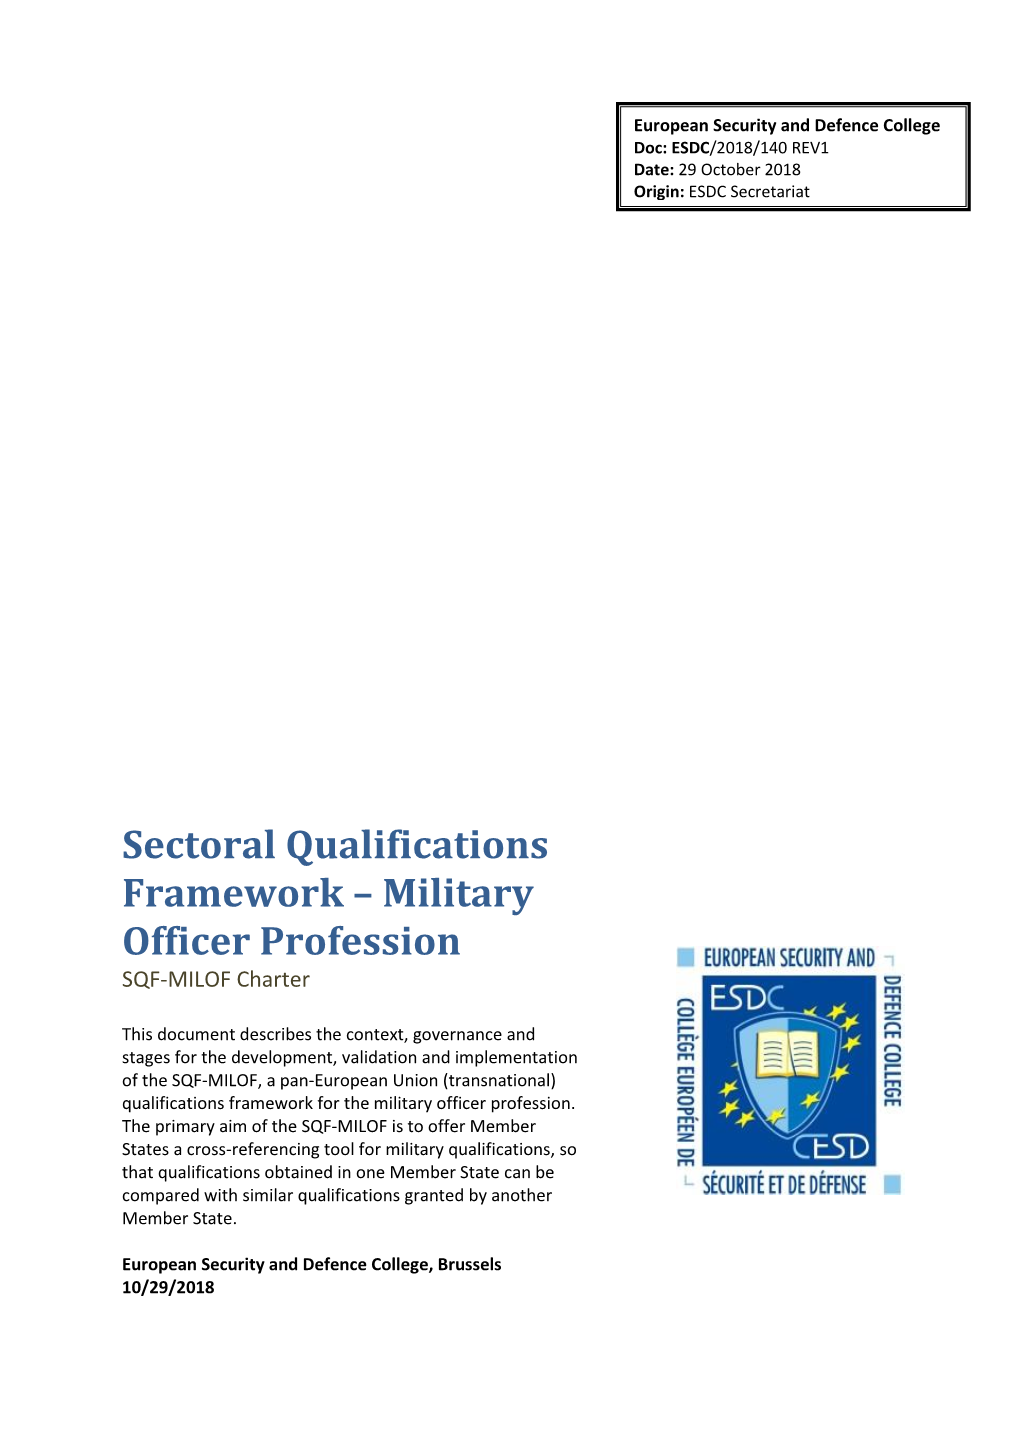 Sectoral Qualifications Framework – Military Officer Profession SQF-MILOF Charter